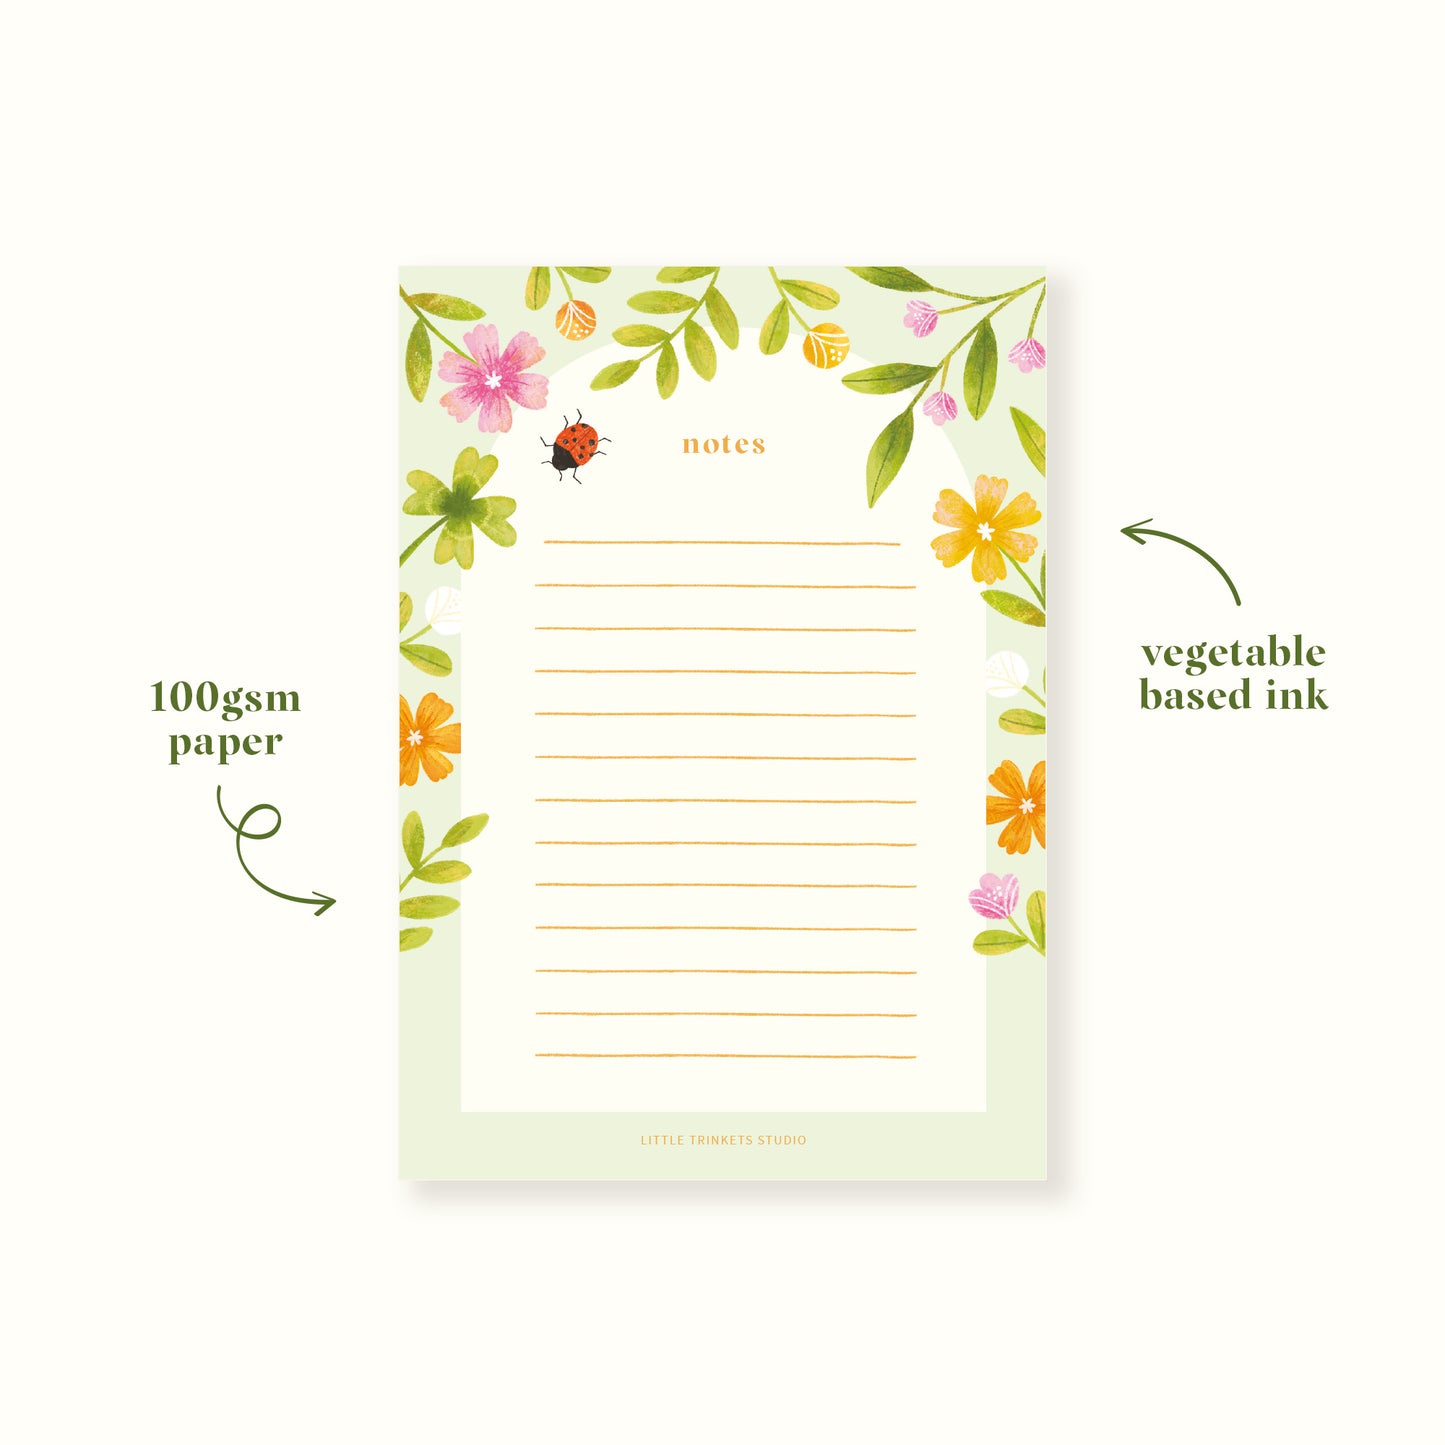 eco-friendly A6 ladybird notepad vegetable based ink